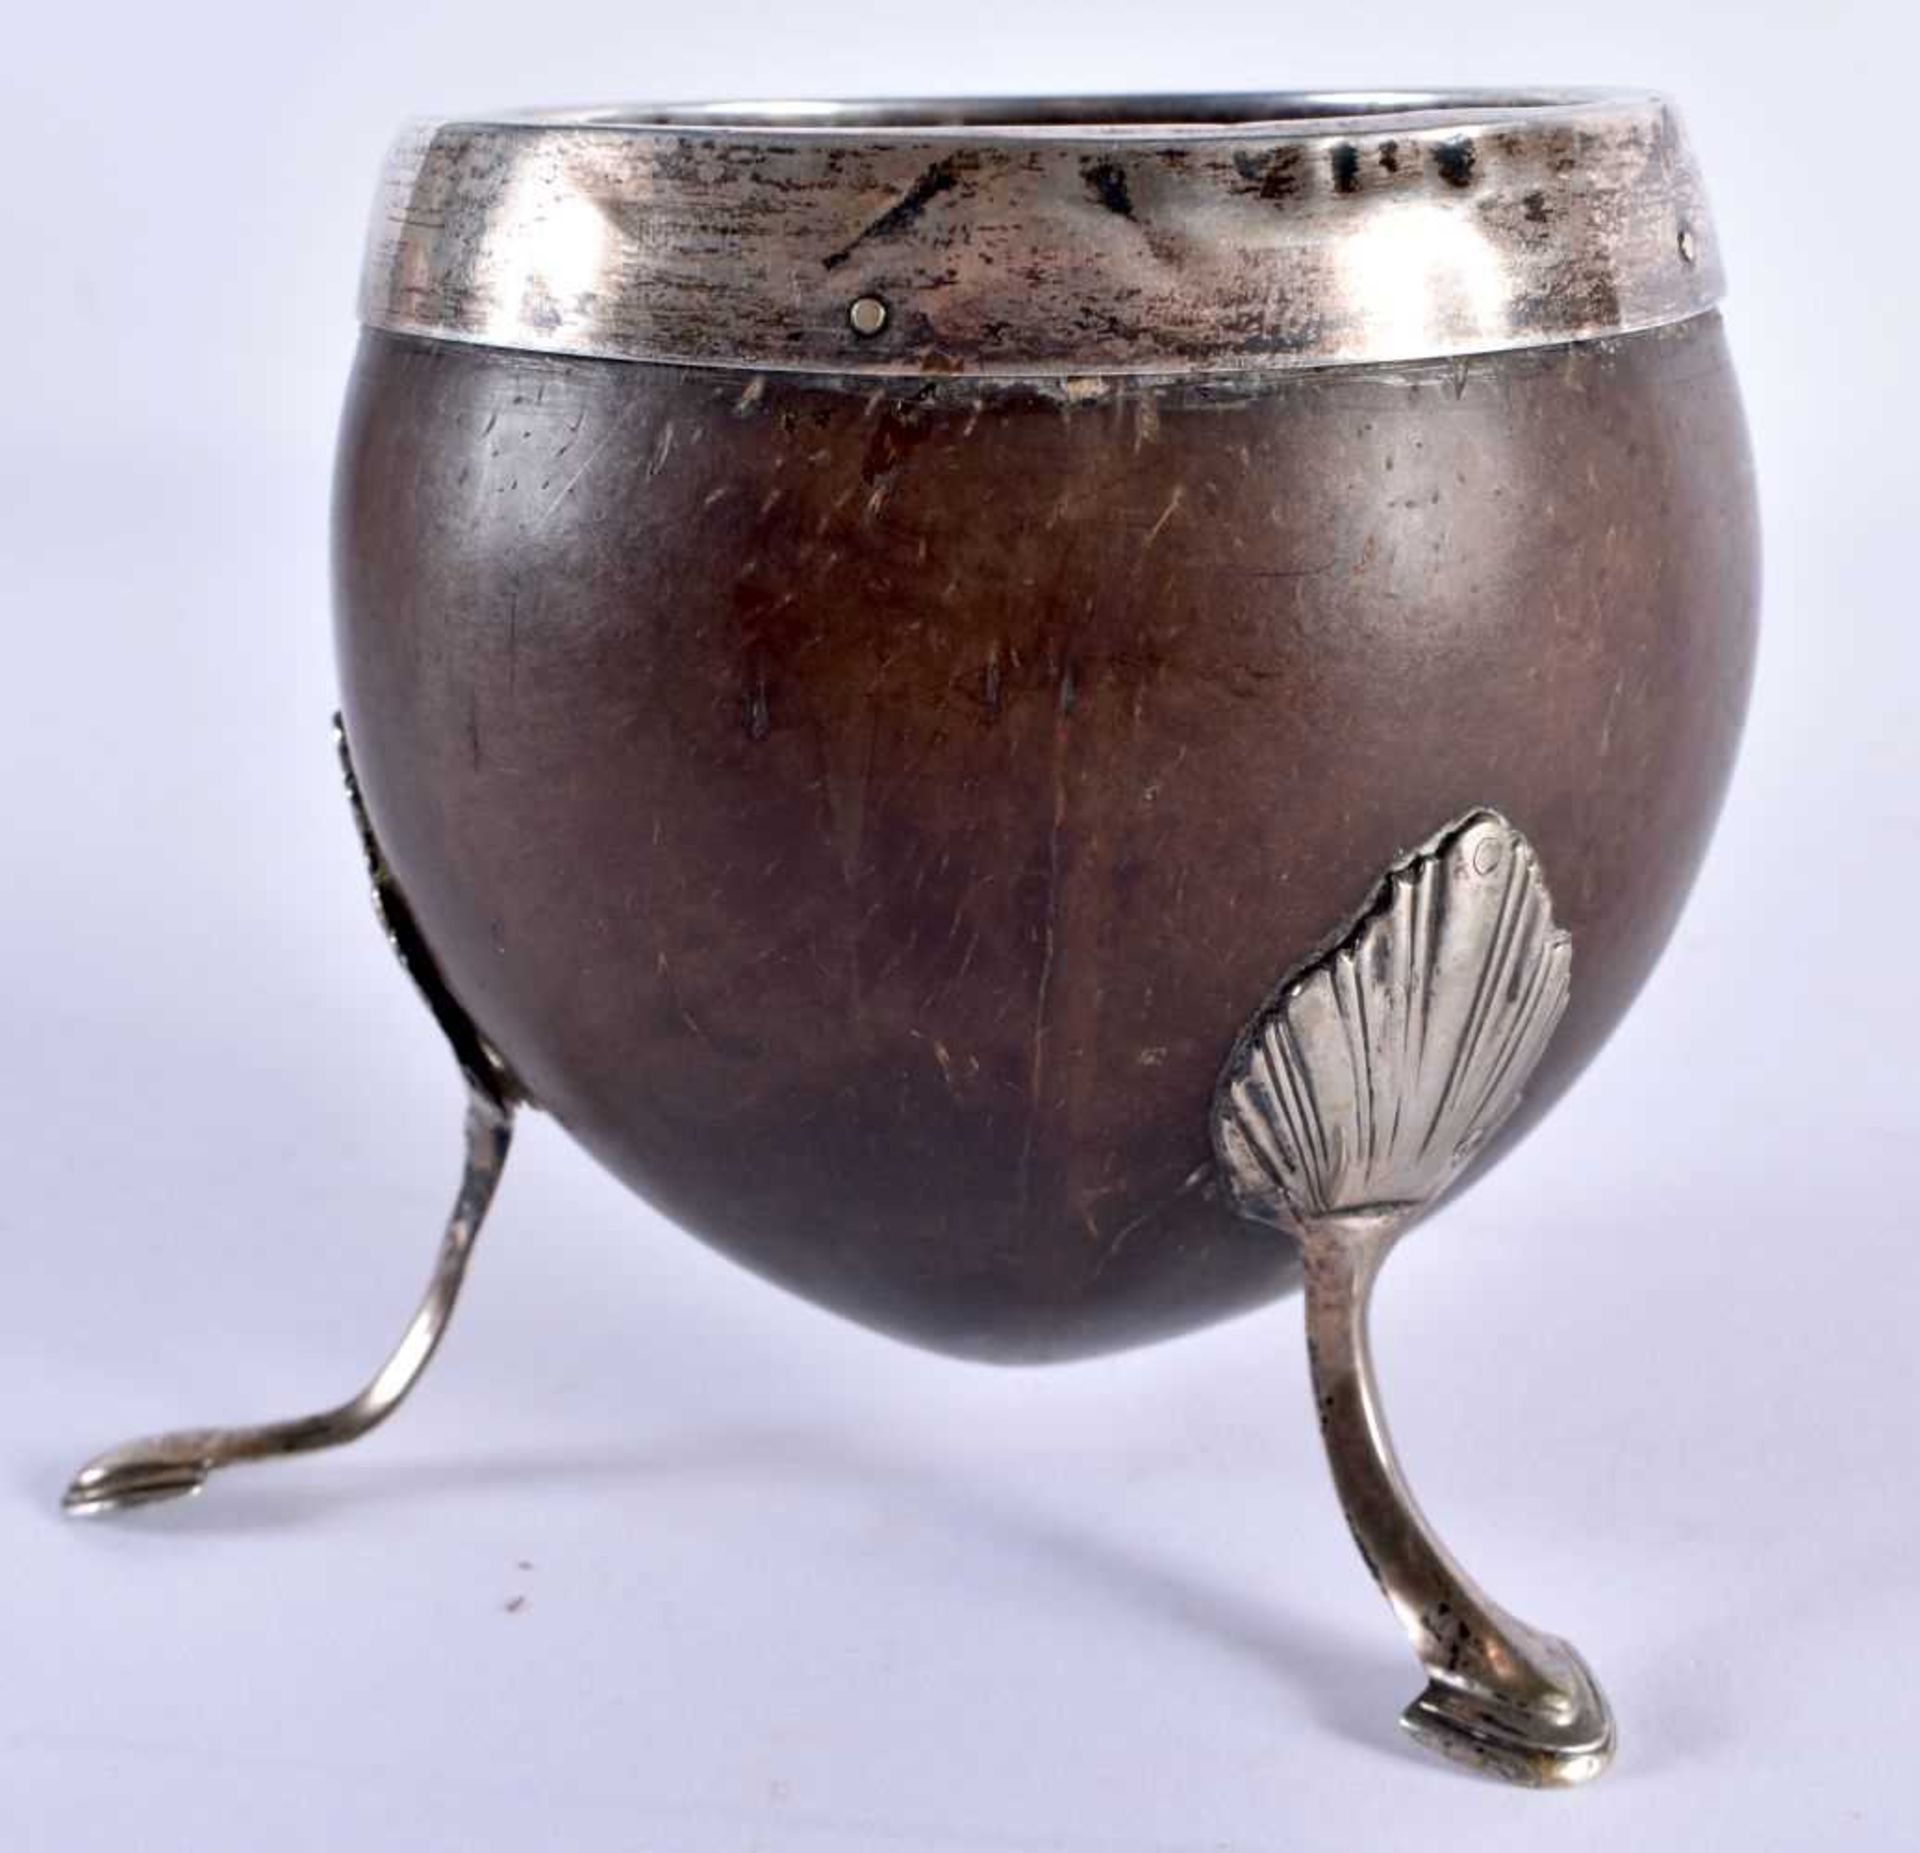 A GEORGE III WHITE METAL MOUNTED COCONUT CUP formed with a scrolling cartouche, upon splayed legs. - Image 3 of 5